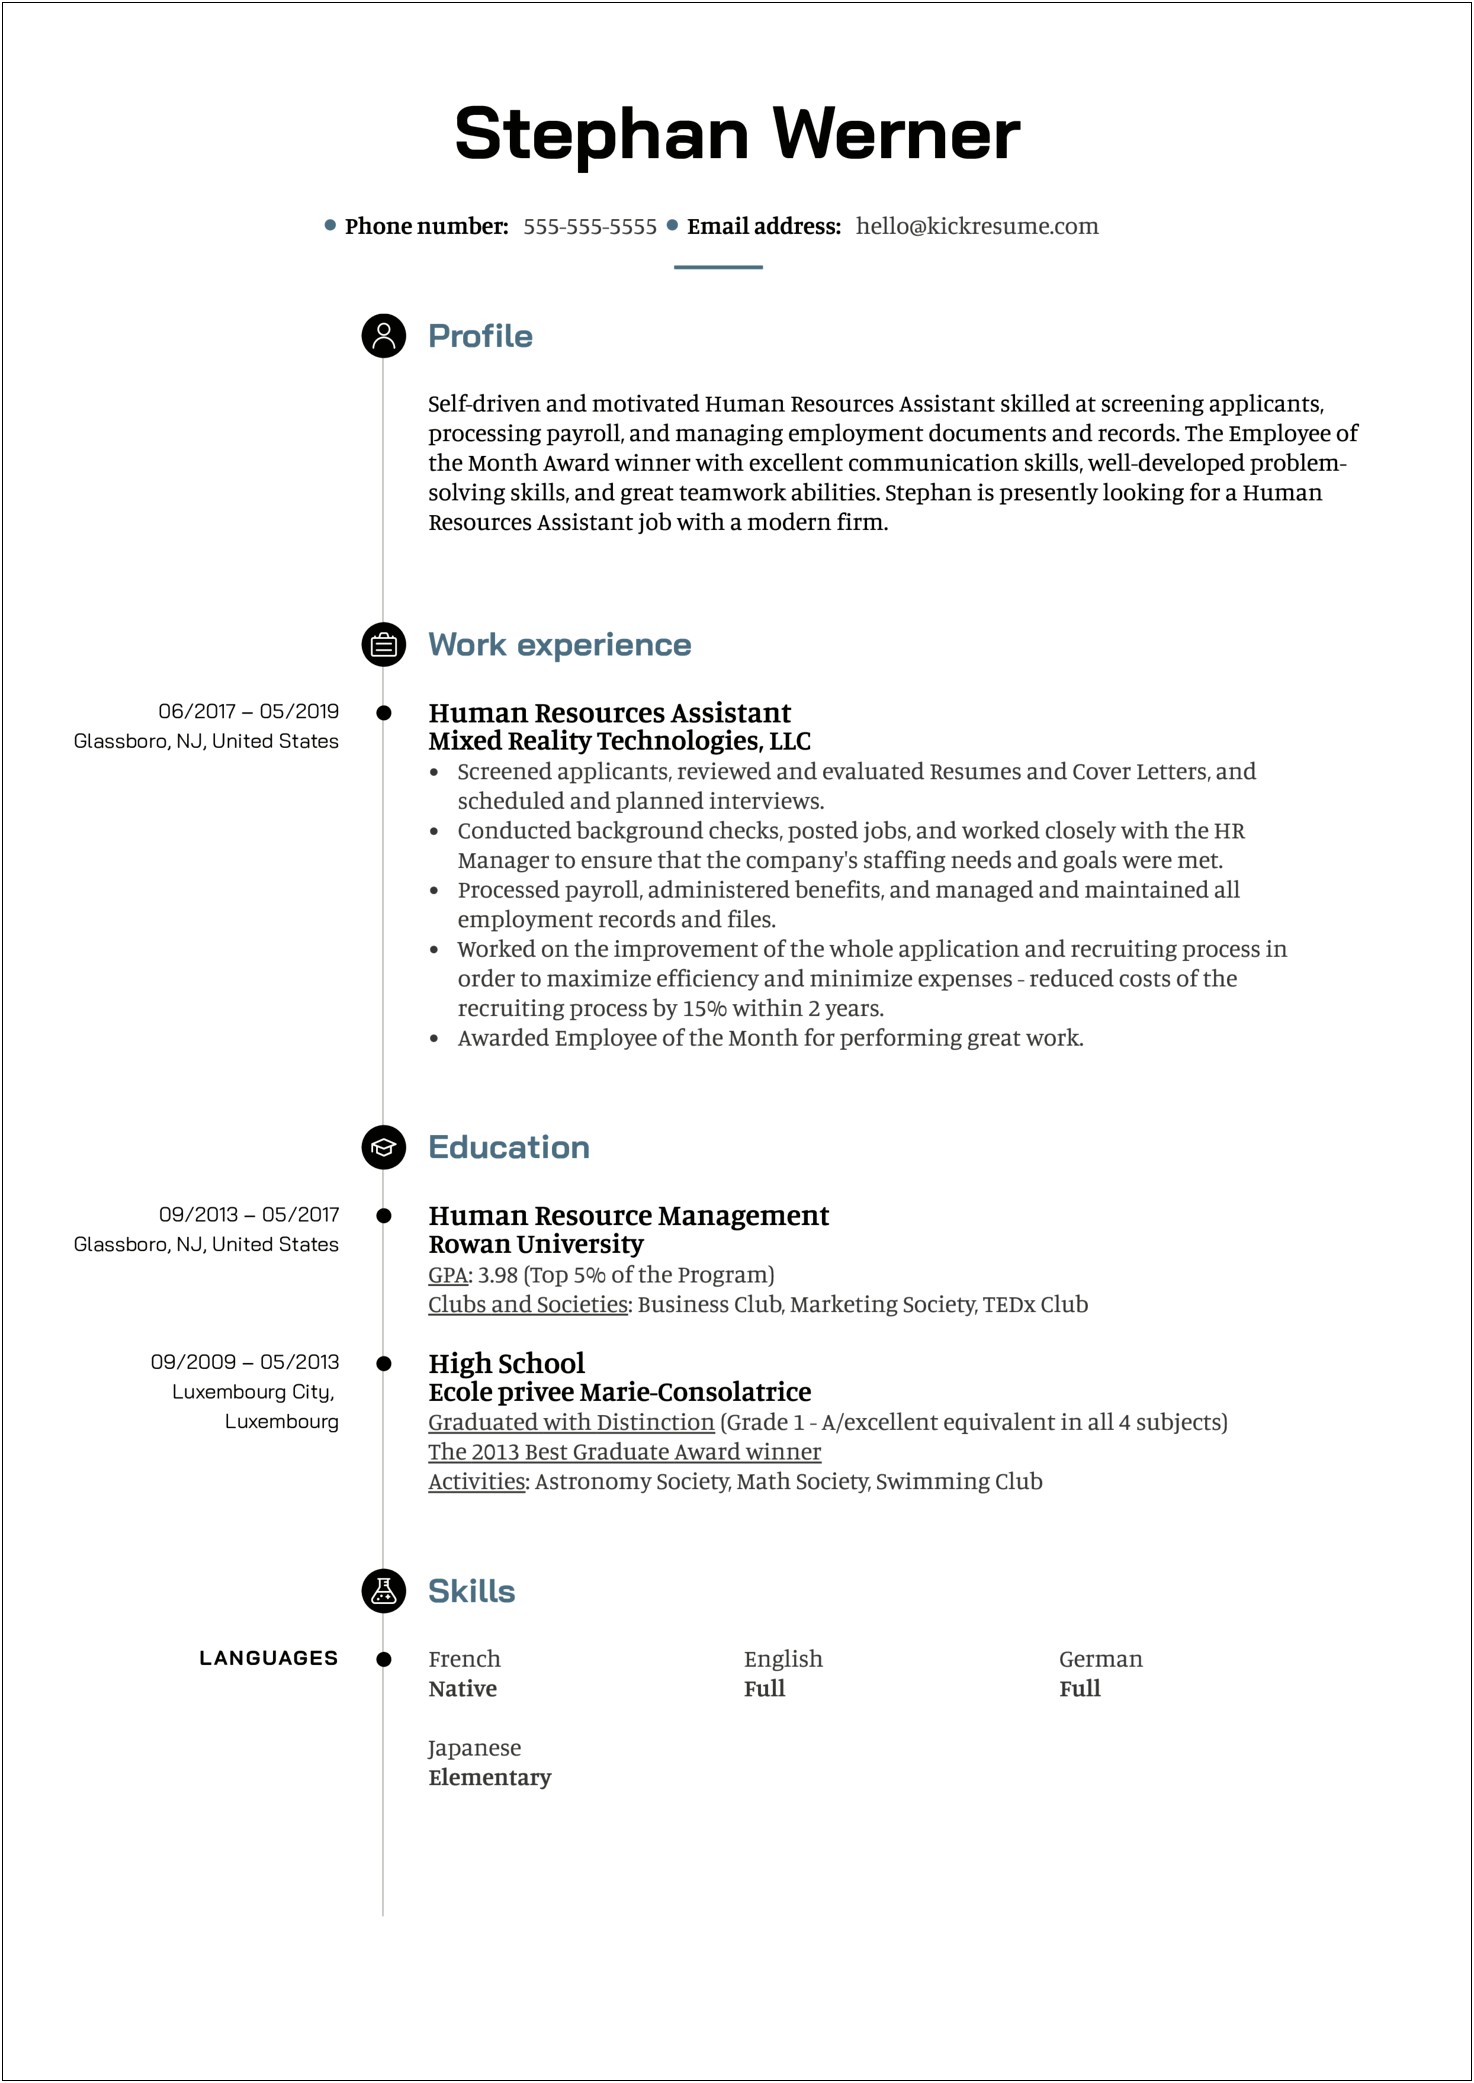 Sample Of An Assistant Hr Director Resume